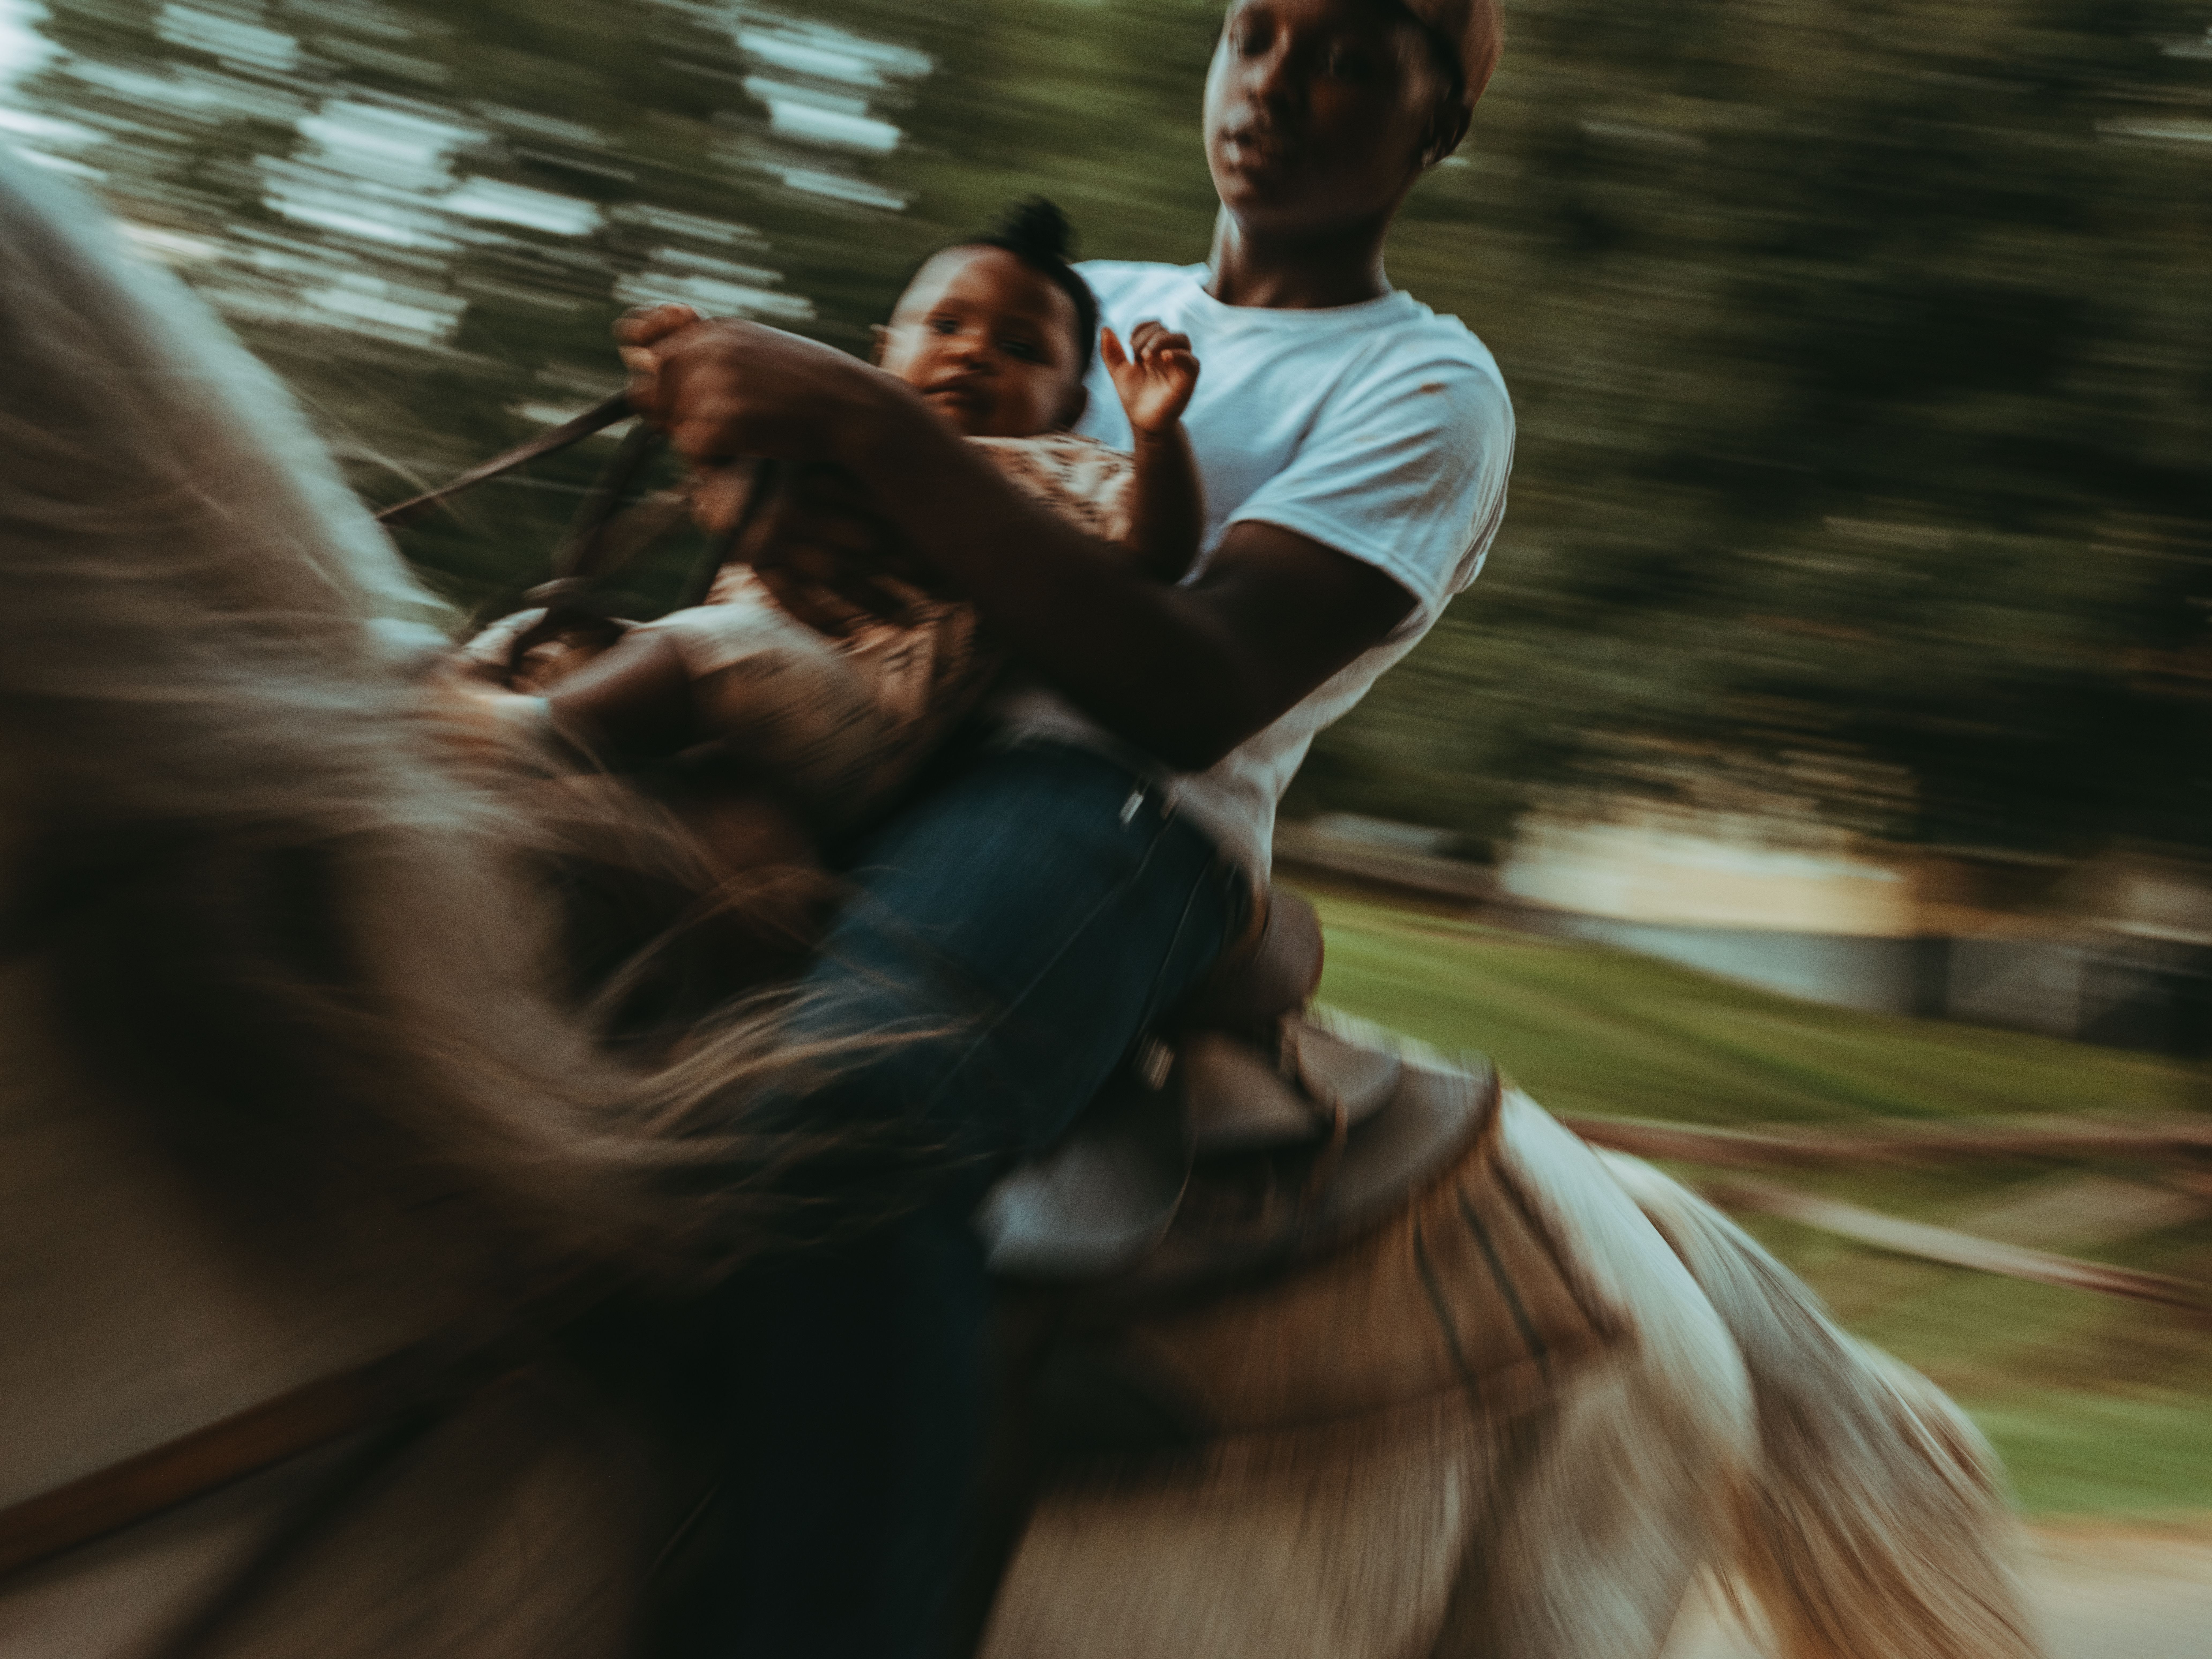 A Black parent rides a horse with a small child.